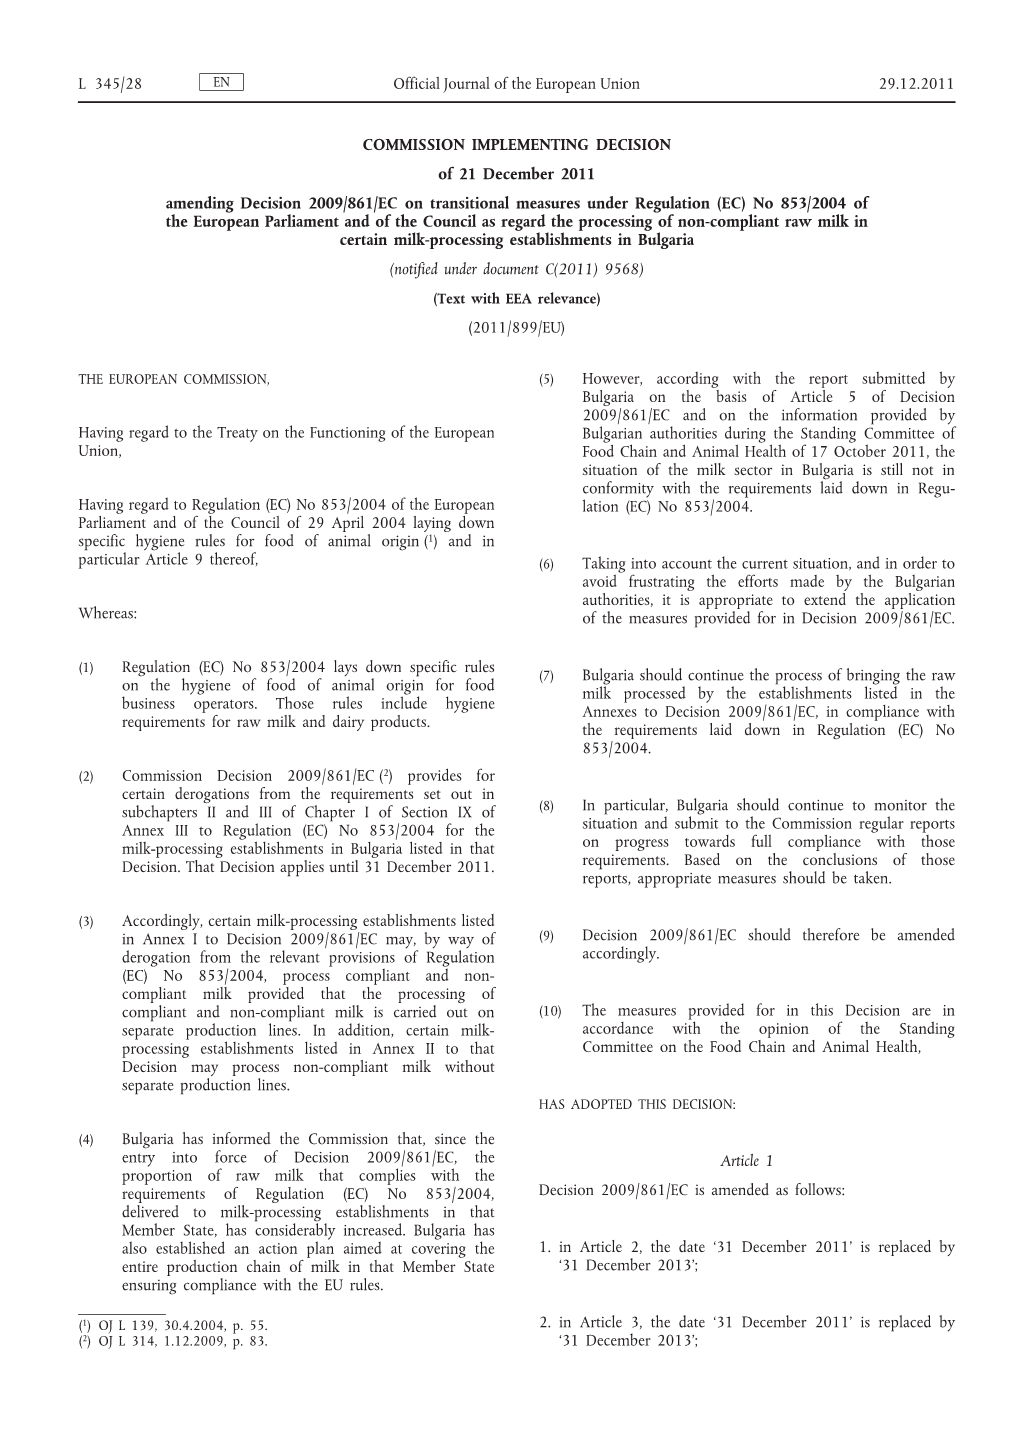 Commission Implementing Decision of 21 December 2011 Amending